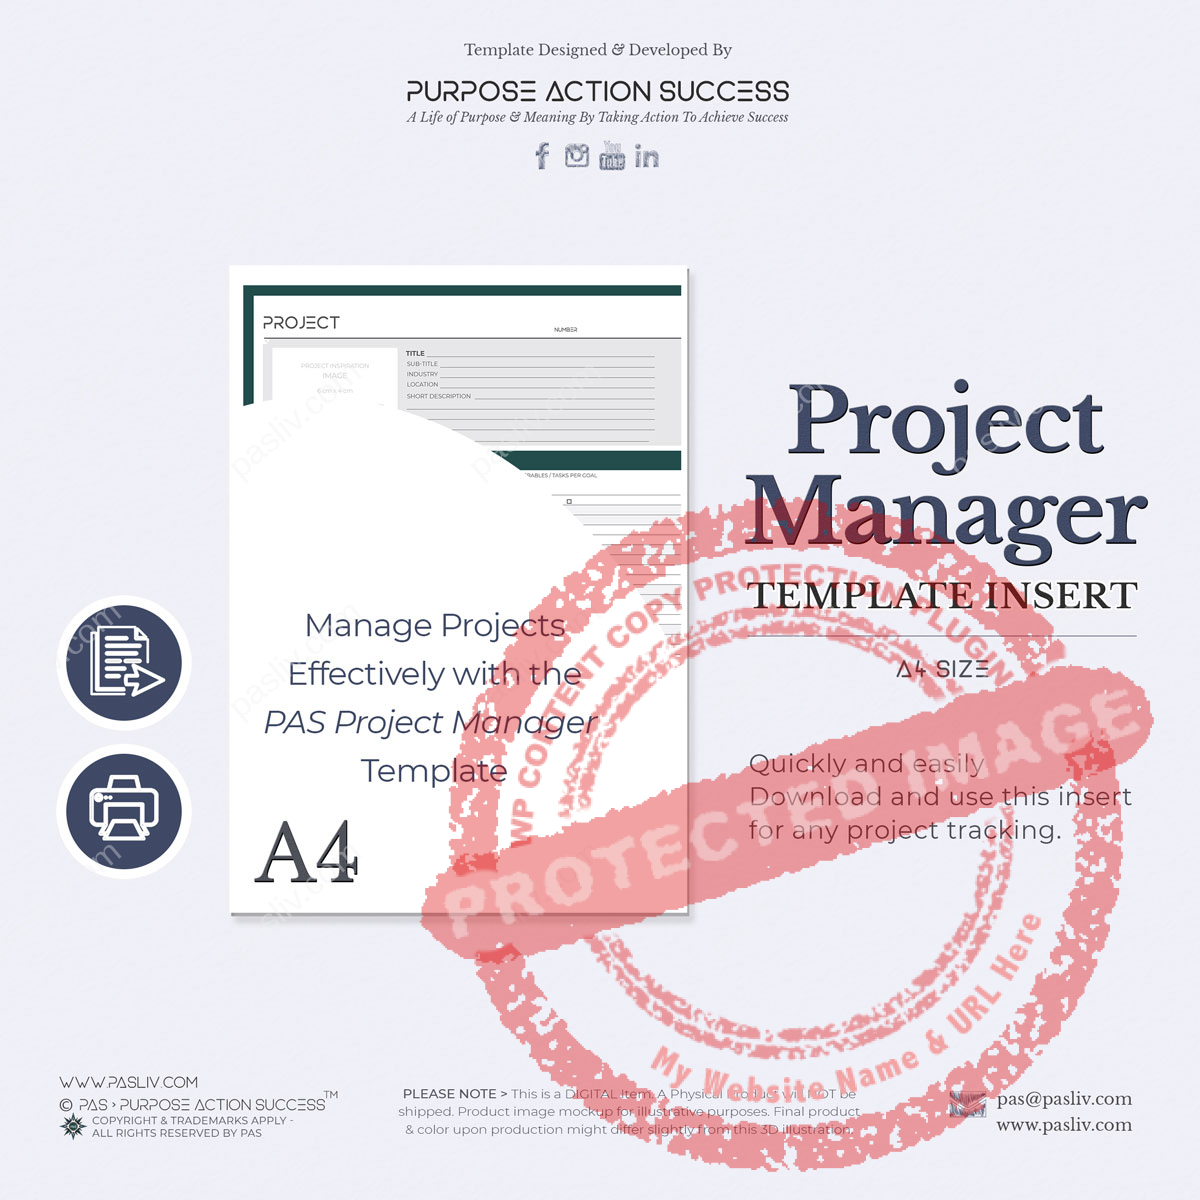 A4 Project Manager Template - Copyright & Trademarks By PAS > Purpose Action Success - All Rights Reserved